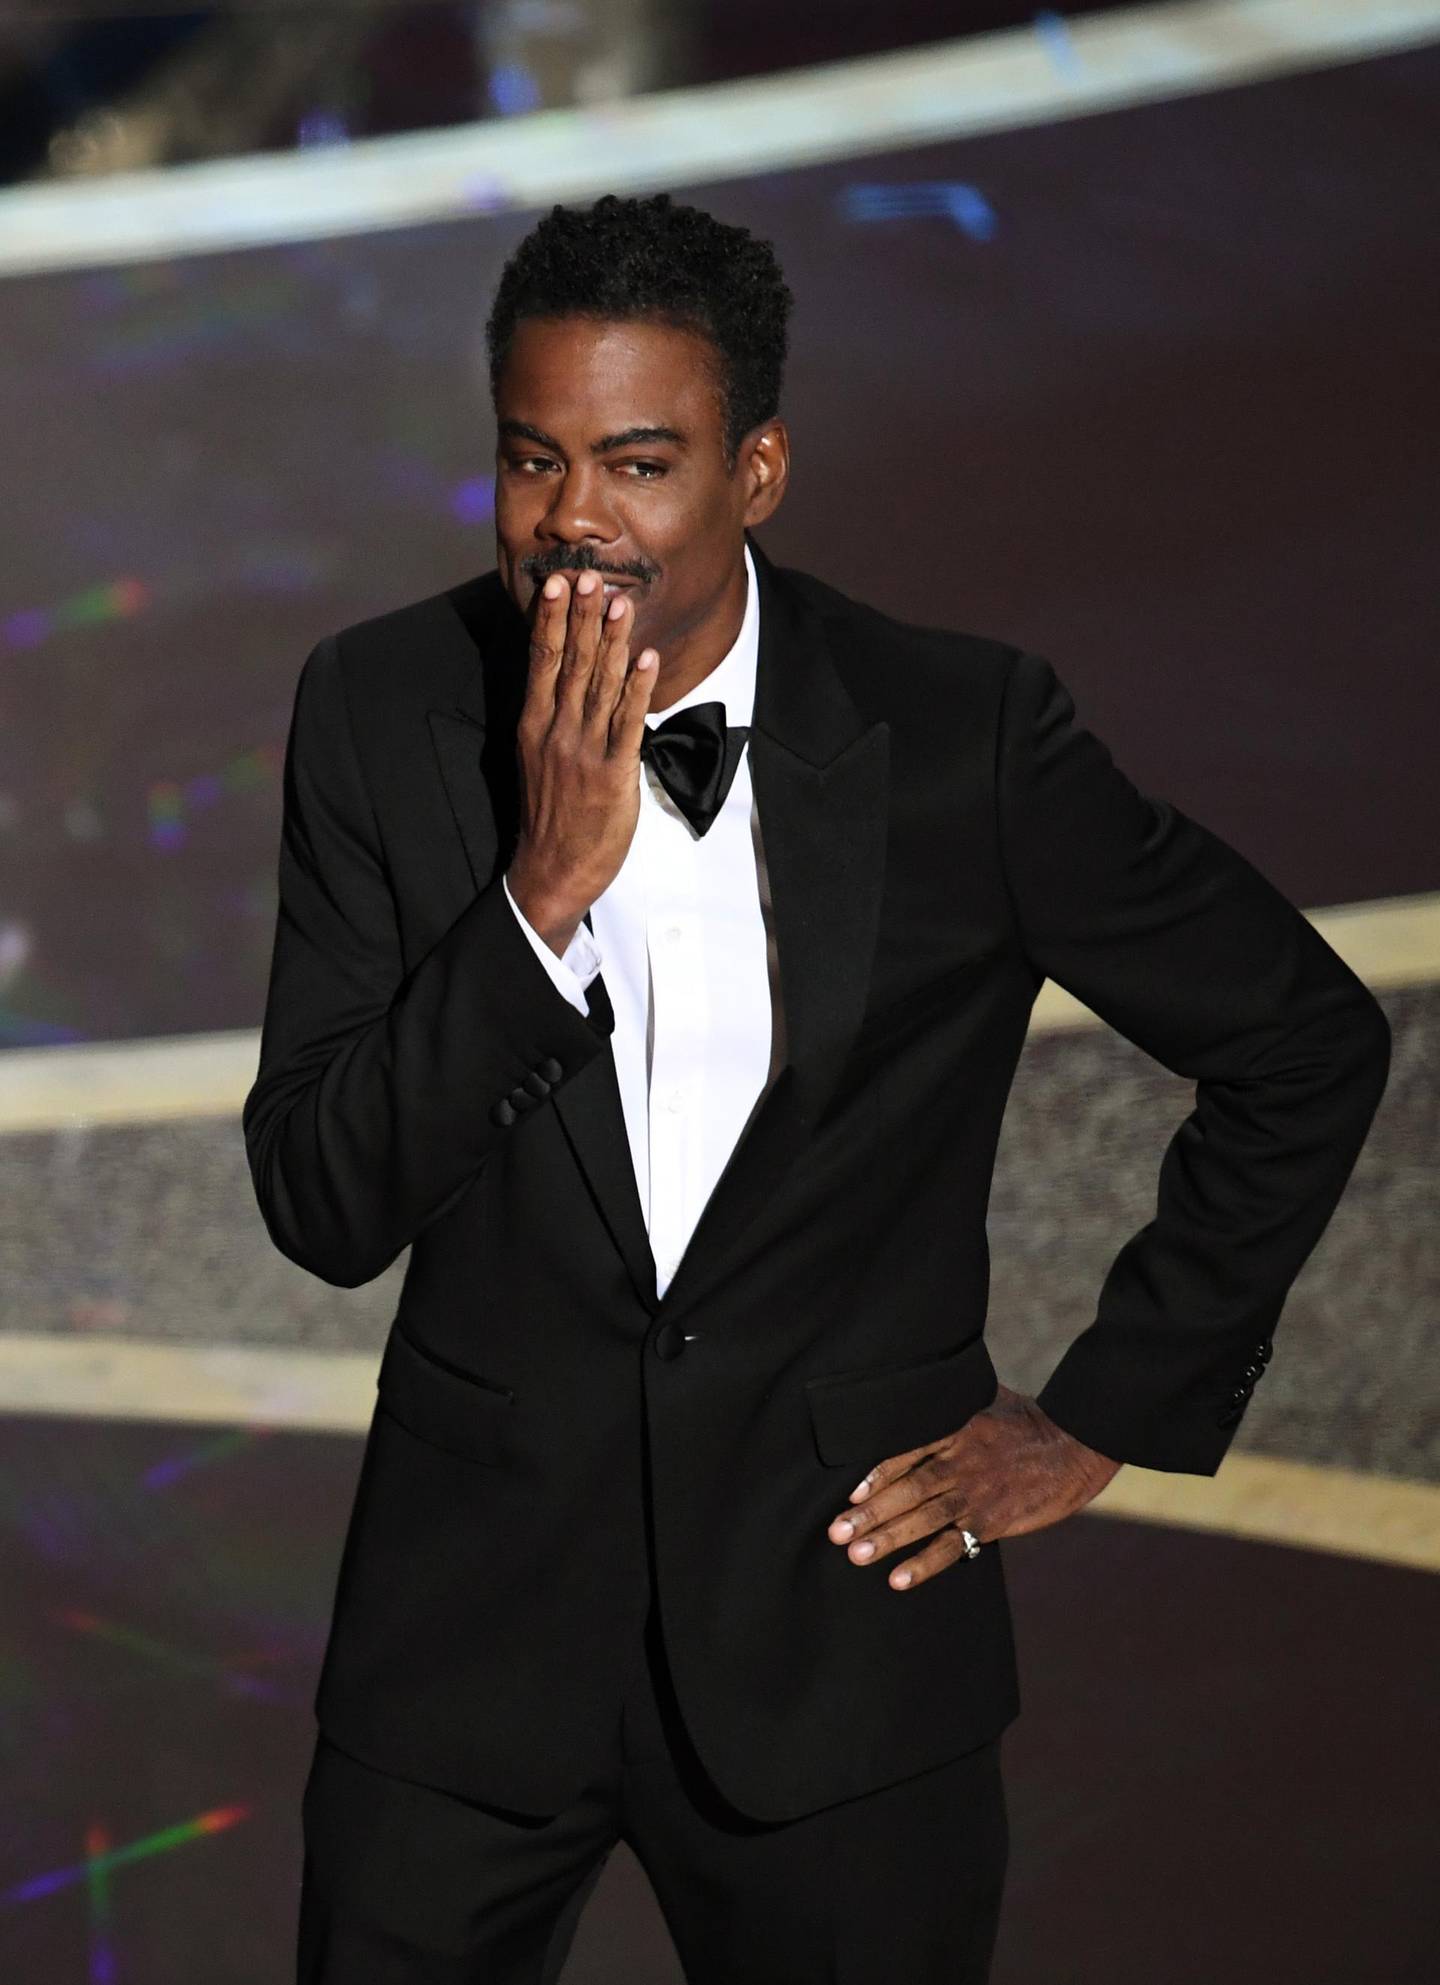 HOLLYWOOD, CALIFORNIA - FEBRUARY 09: Chris Rock speaks onstage during the 92nd Annual Academy Awards at Dolby Theatre on February 09, 2020 in Hollywood, California.   Kevin Winter/Getty Images/AFP